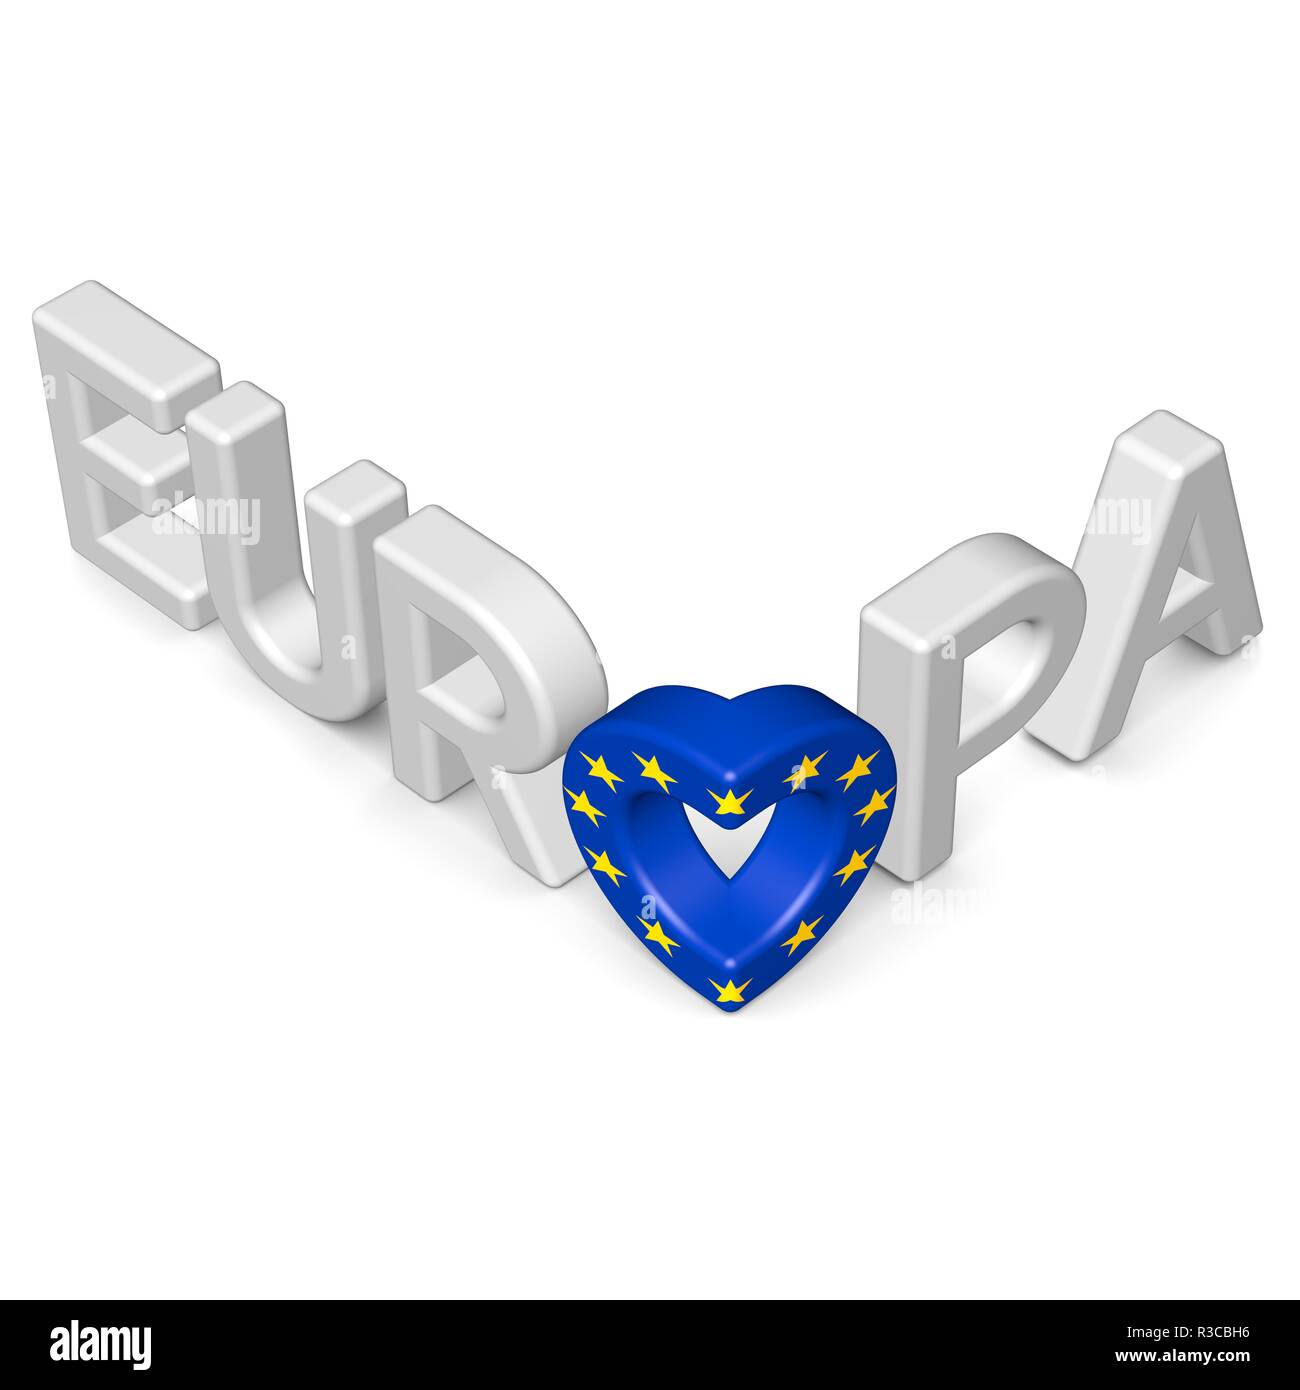 lettering europe constitutes heart 2 Stock Photo